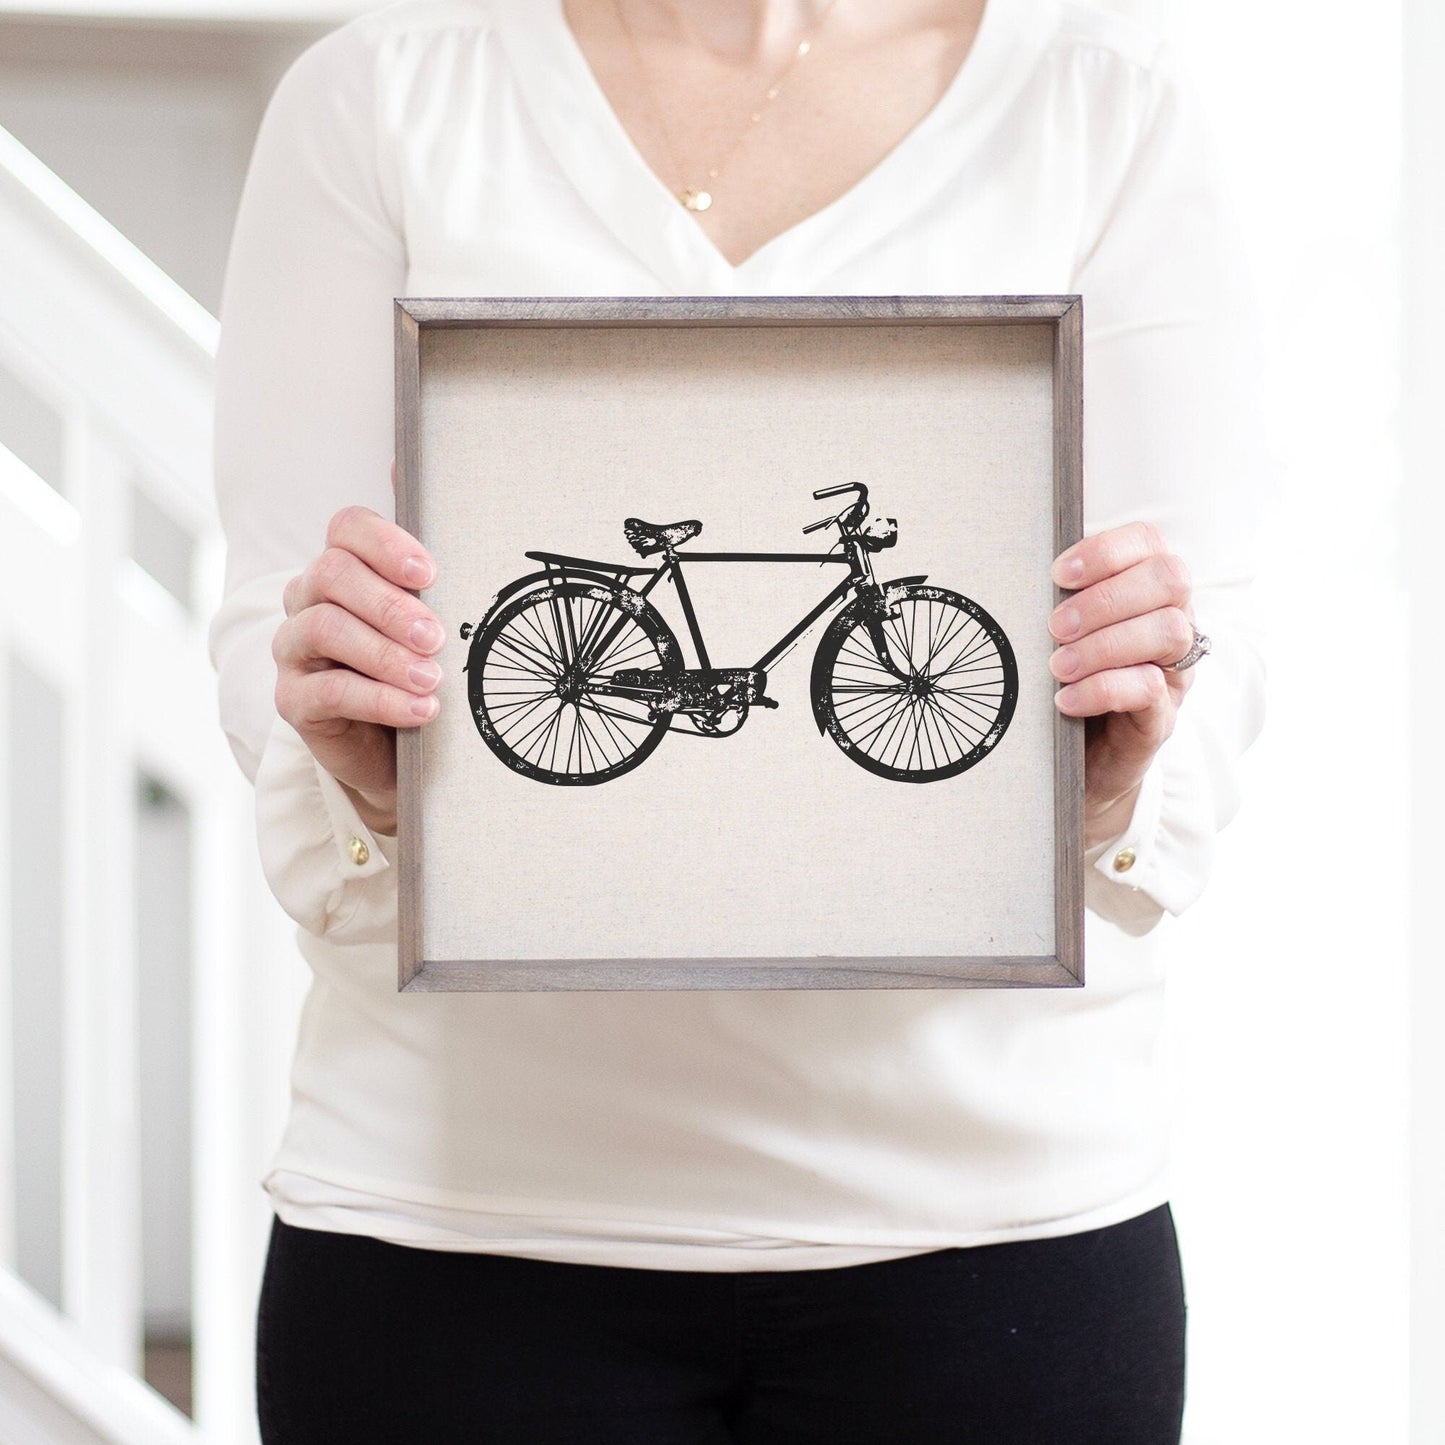 Vintage Bicycle Sign | Personalized Sign | Home Decor | Bike Sign | Bicycle Sign | Vintage Decor | Wall Art | Rustic Bicycle | Home Decor - Sweet Hooligans Design